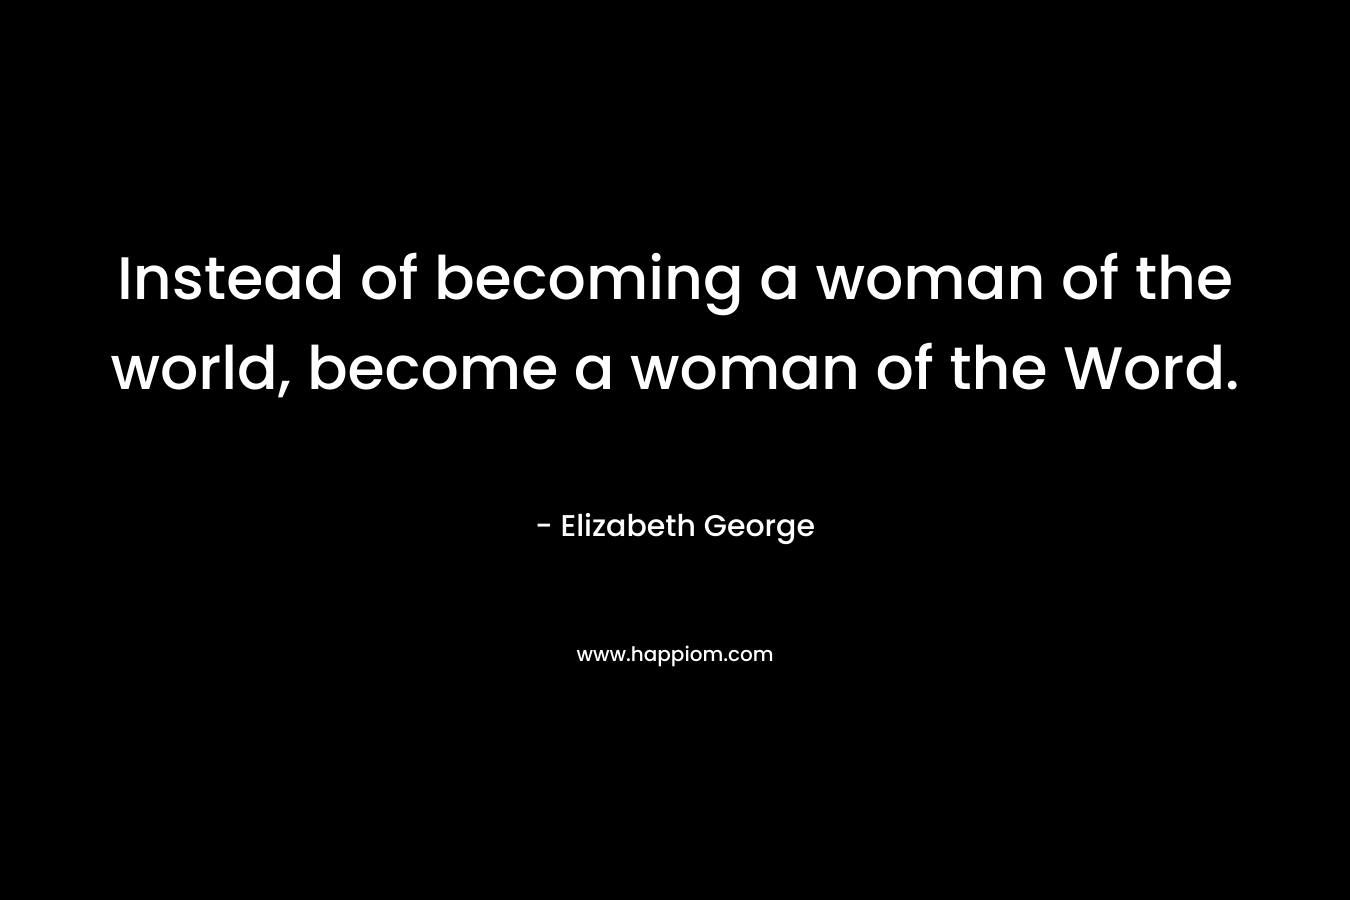 Instead of becoming a woman of the world, become a woman of the Word.